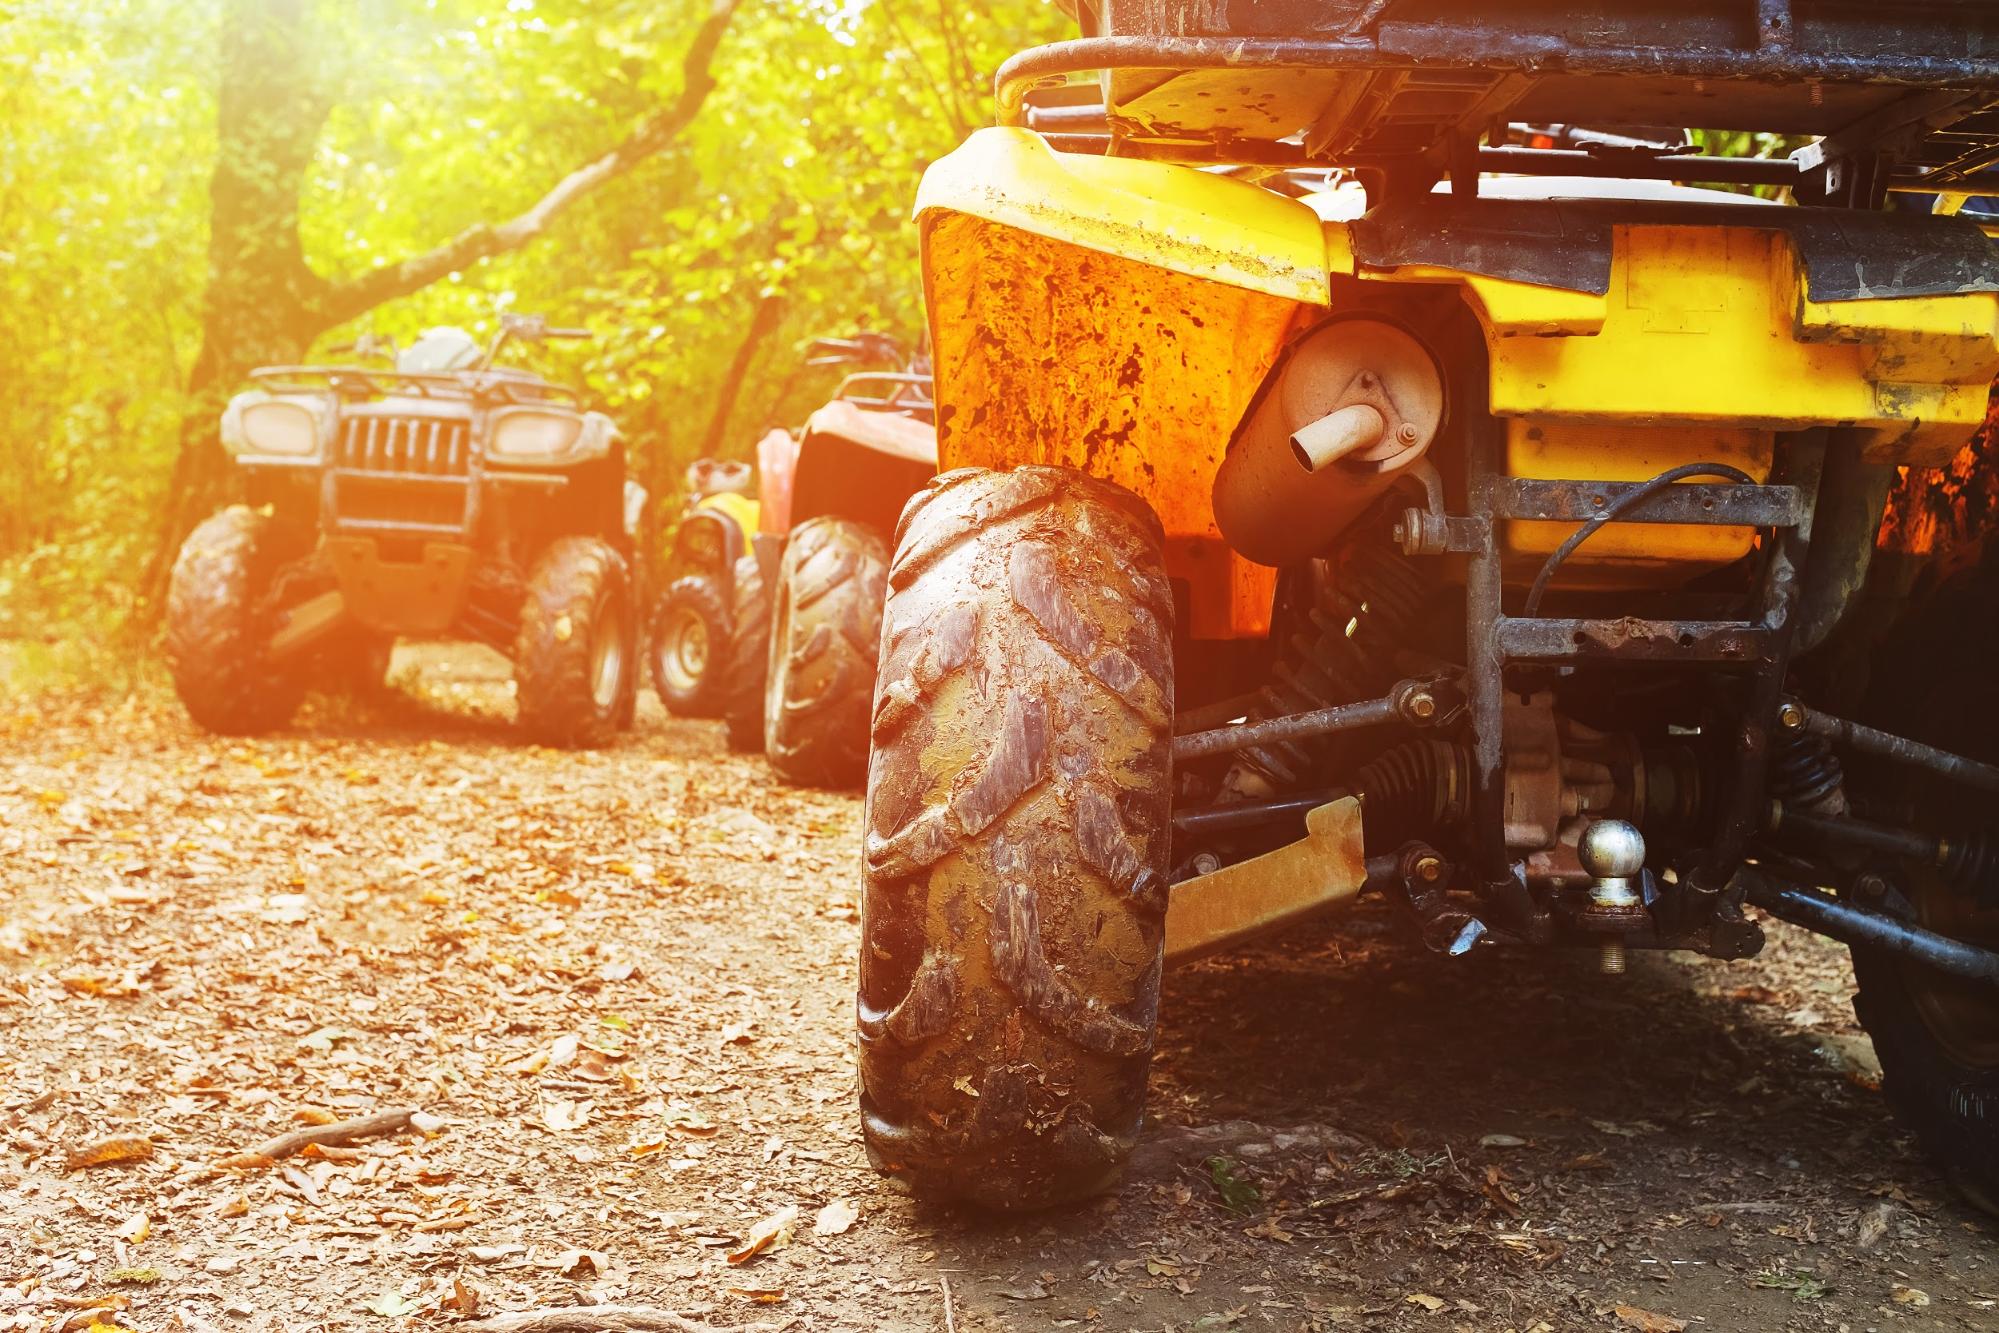 Parked ATVs at the end of a dirt trial in the woods. Following West Virginia's ATV laws can help keep riders safe while having fun on a trail.